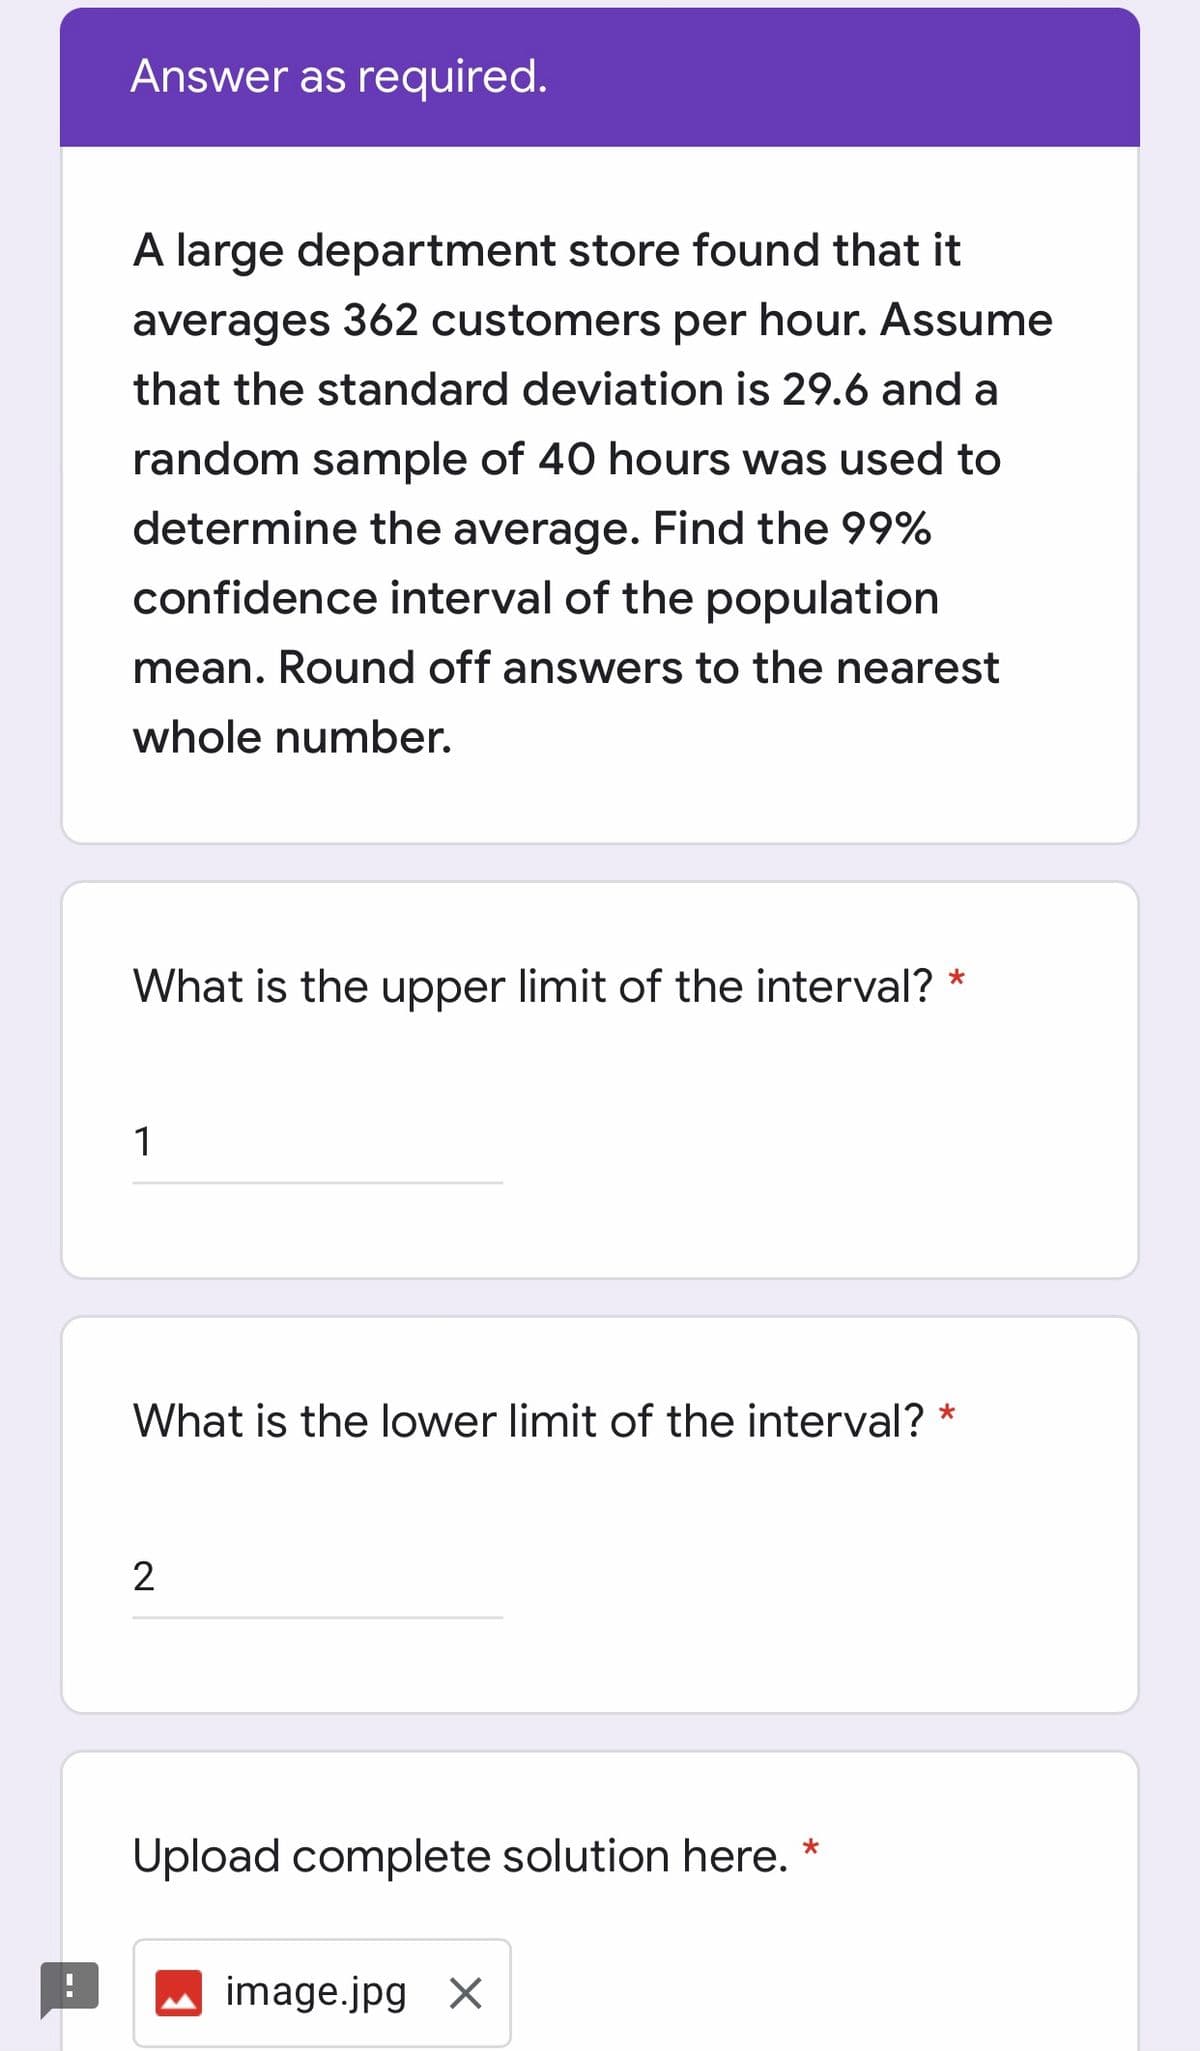 Answer as required.
A large department store found that it
averages 362 customers per hour. Assume
that the standard deviation is 29.6 and a
random sample of 40 hours was used to
determine the average. Find the 99%
confidence interval of the population
mean. Round off answers to the nearest
whole number.
What is the upper limit of the interval? *
1
What is the lower limit of the interval?
Upload complete solution here. *
image.jpg X
